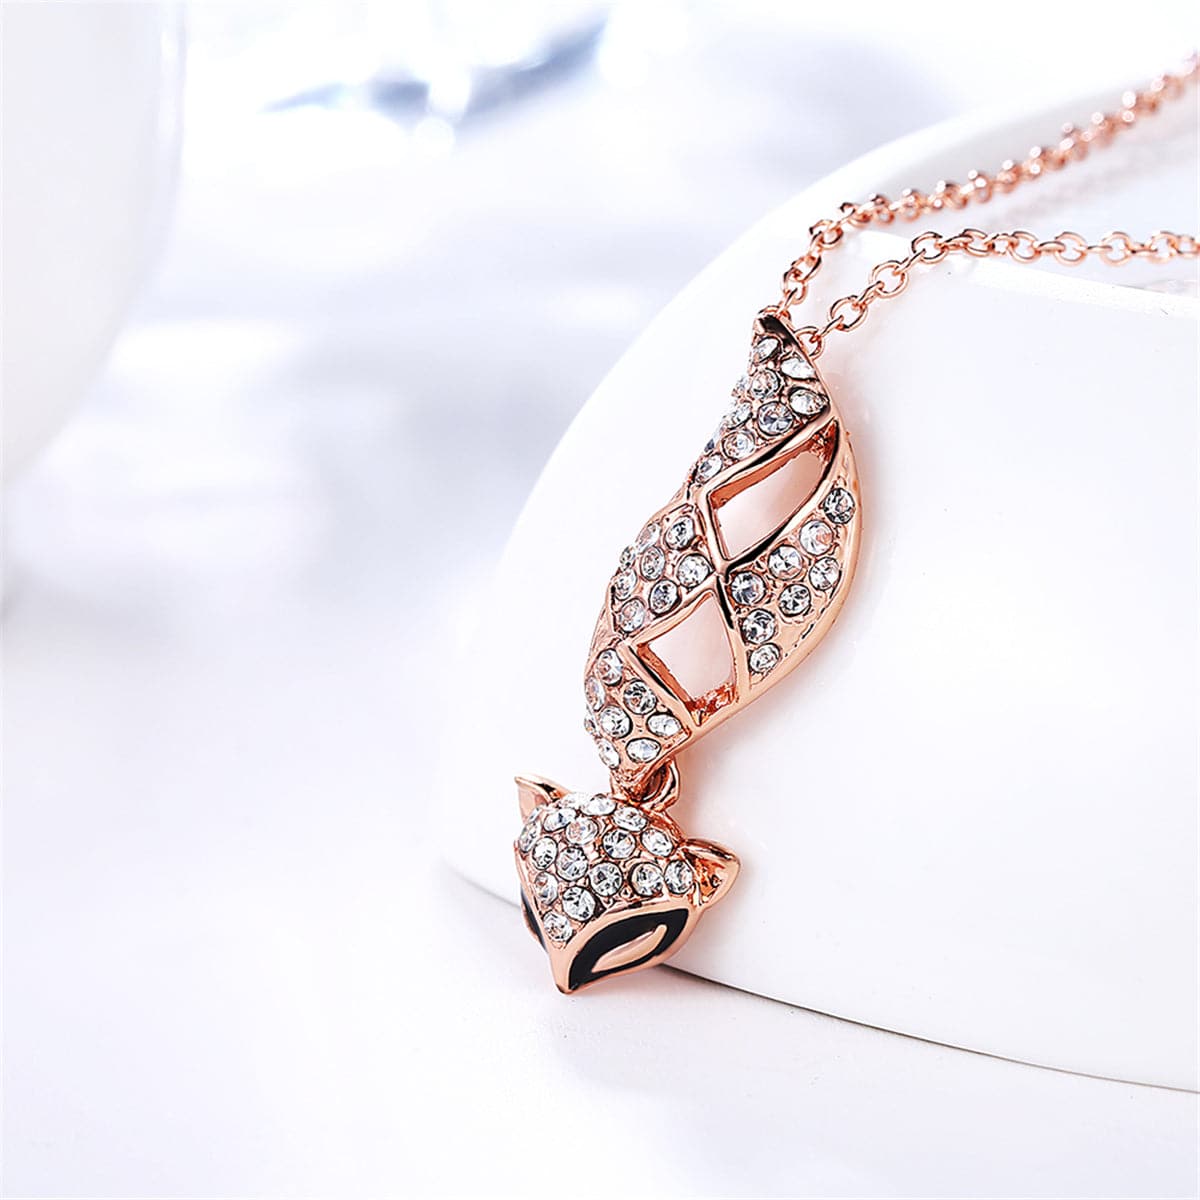 Cubic Zirconia & 18k Rose Gold-Plated Fox Pendant Necklace - streetregion